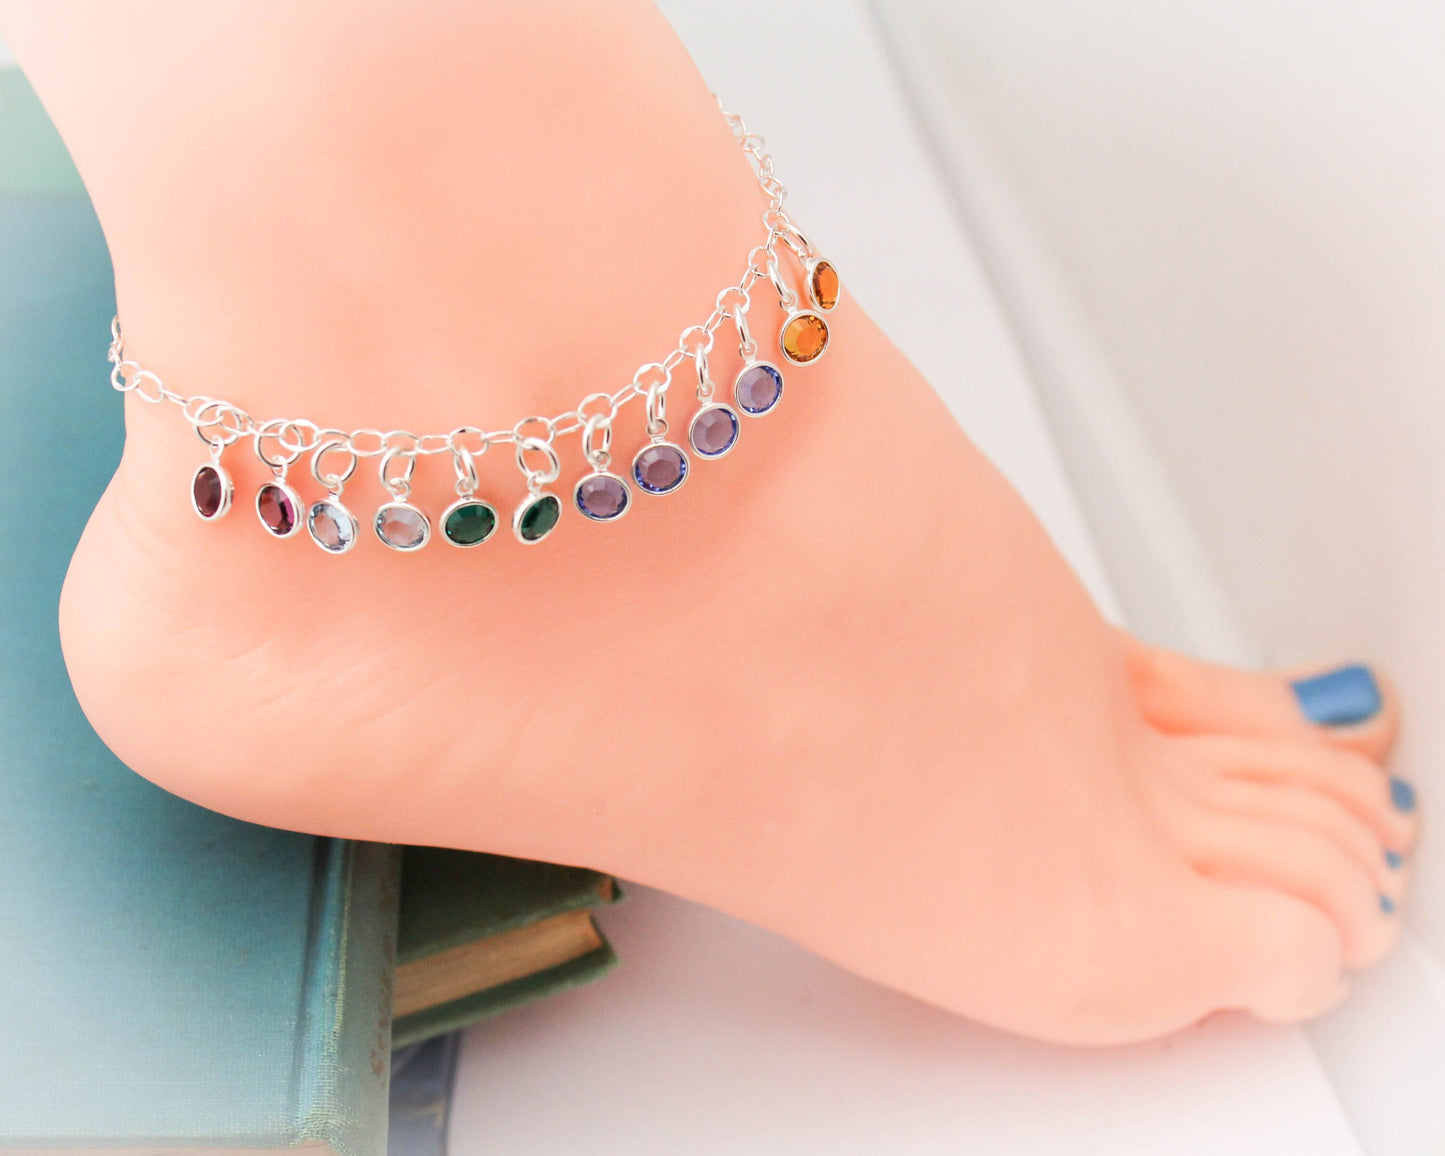 Personalized Birthstone Anklet, Crystal Birthstone Anklet, Mom Anklet with Children's Birthstones, Mother's Anklet, Mother's Day Gift